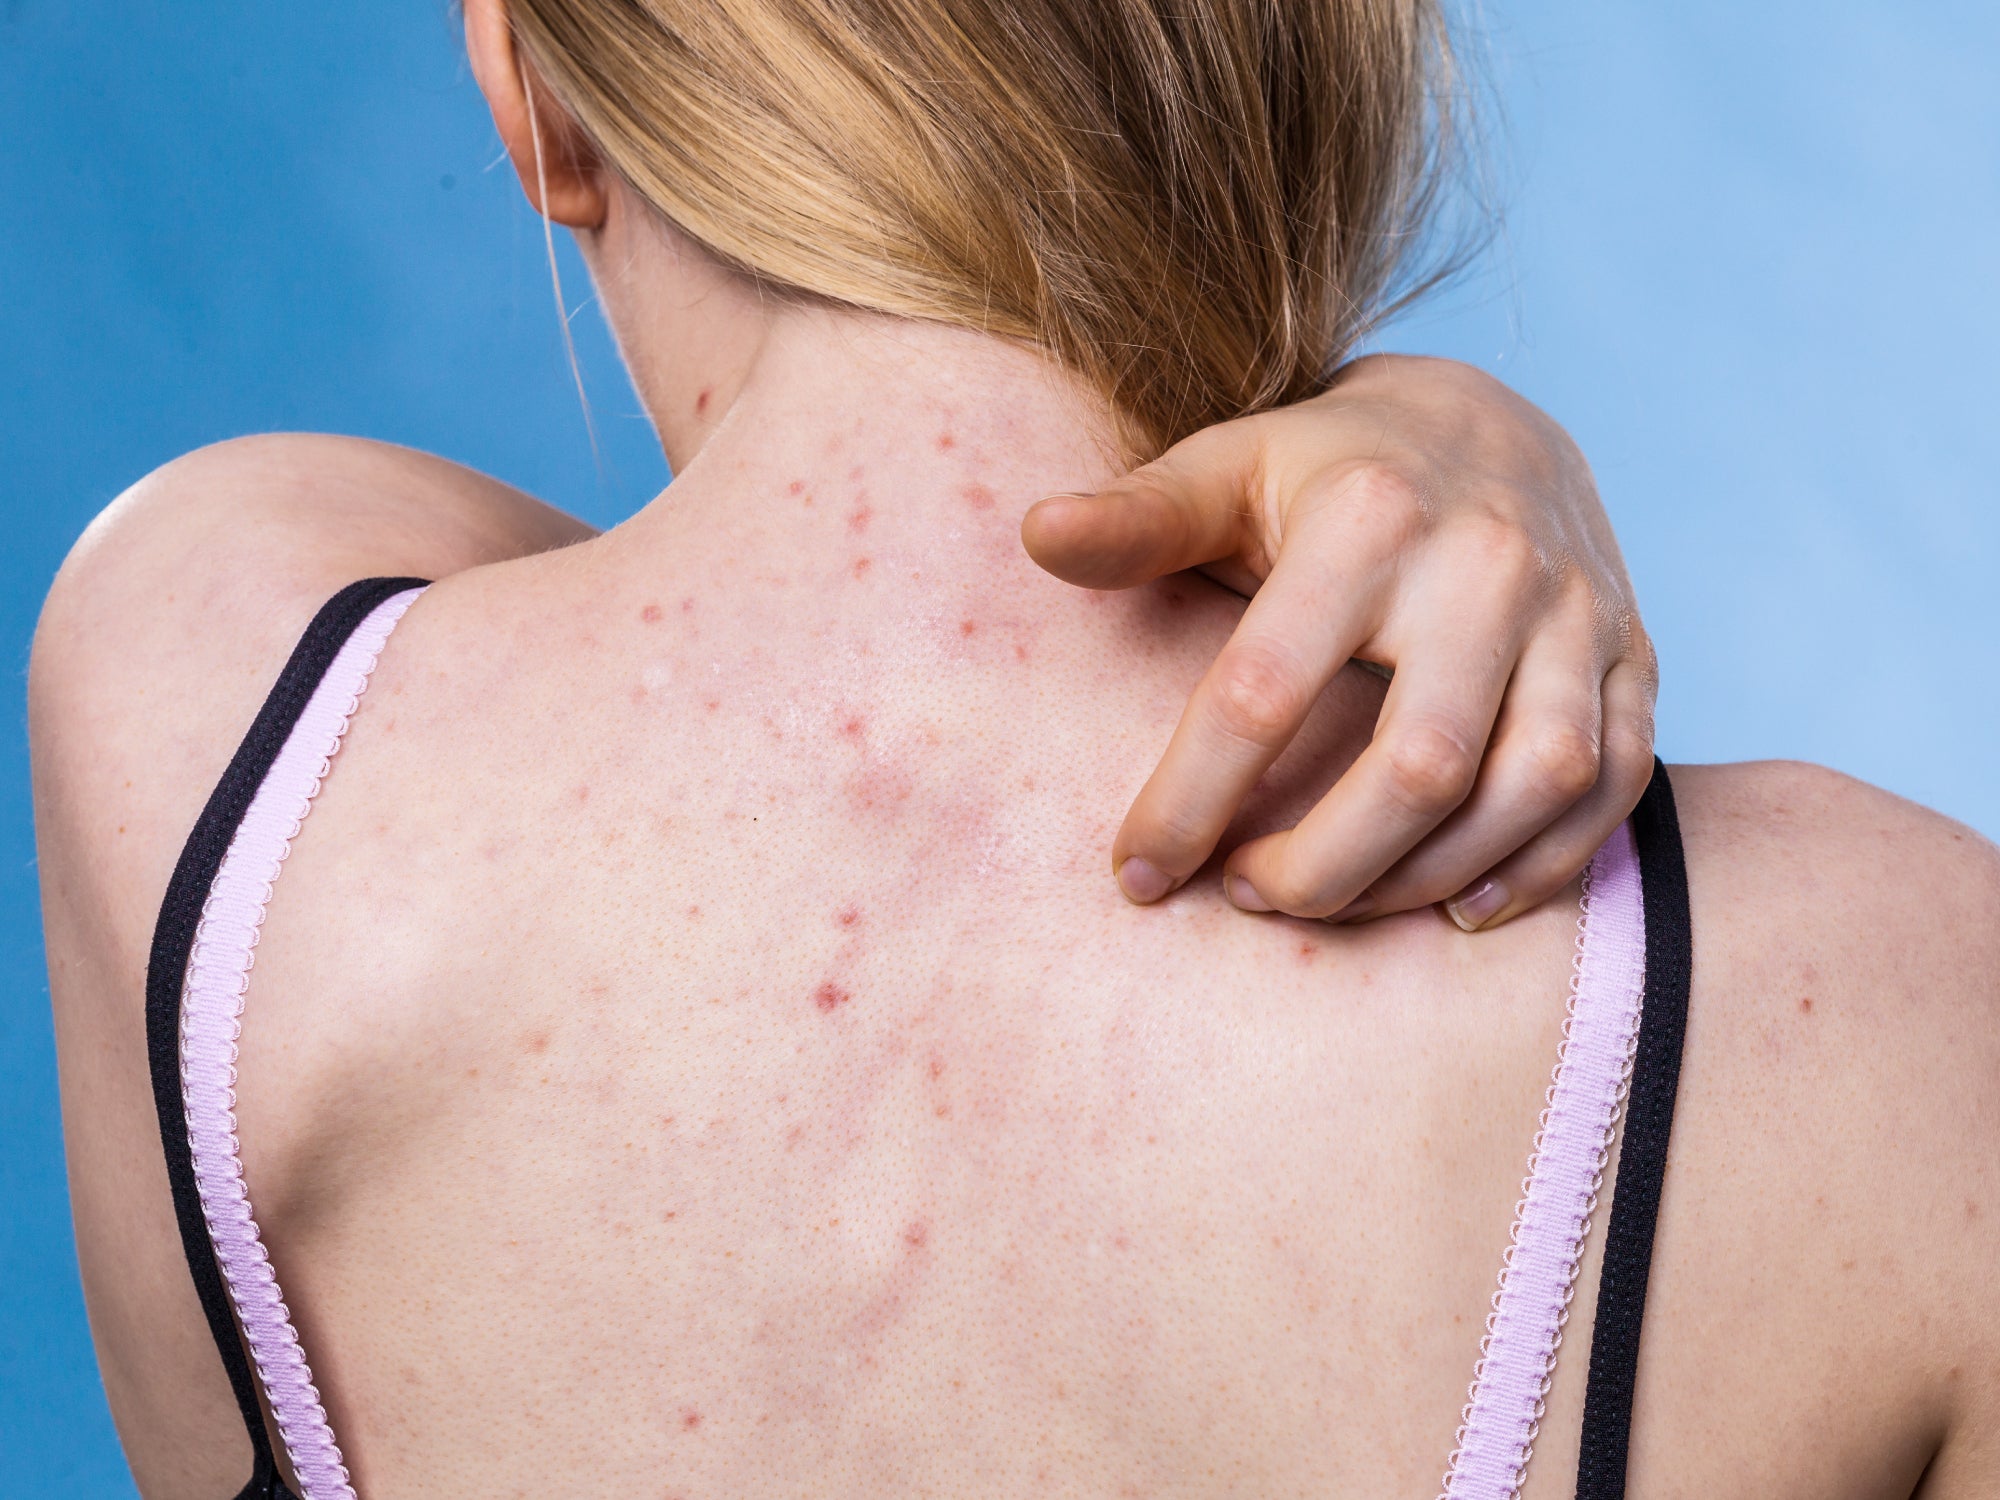 Hives vs Rash - What's the difference between them?